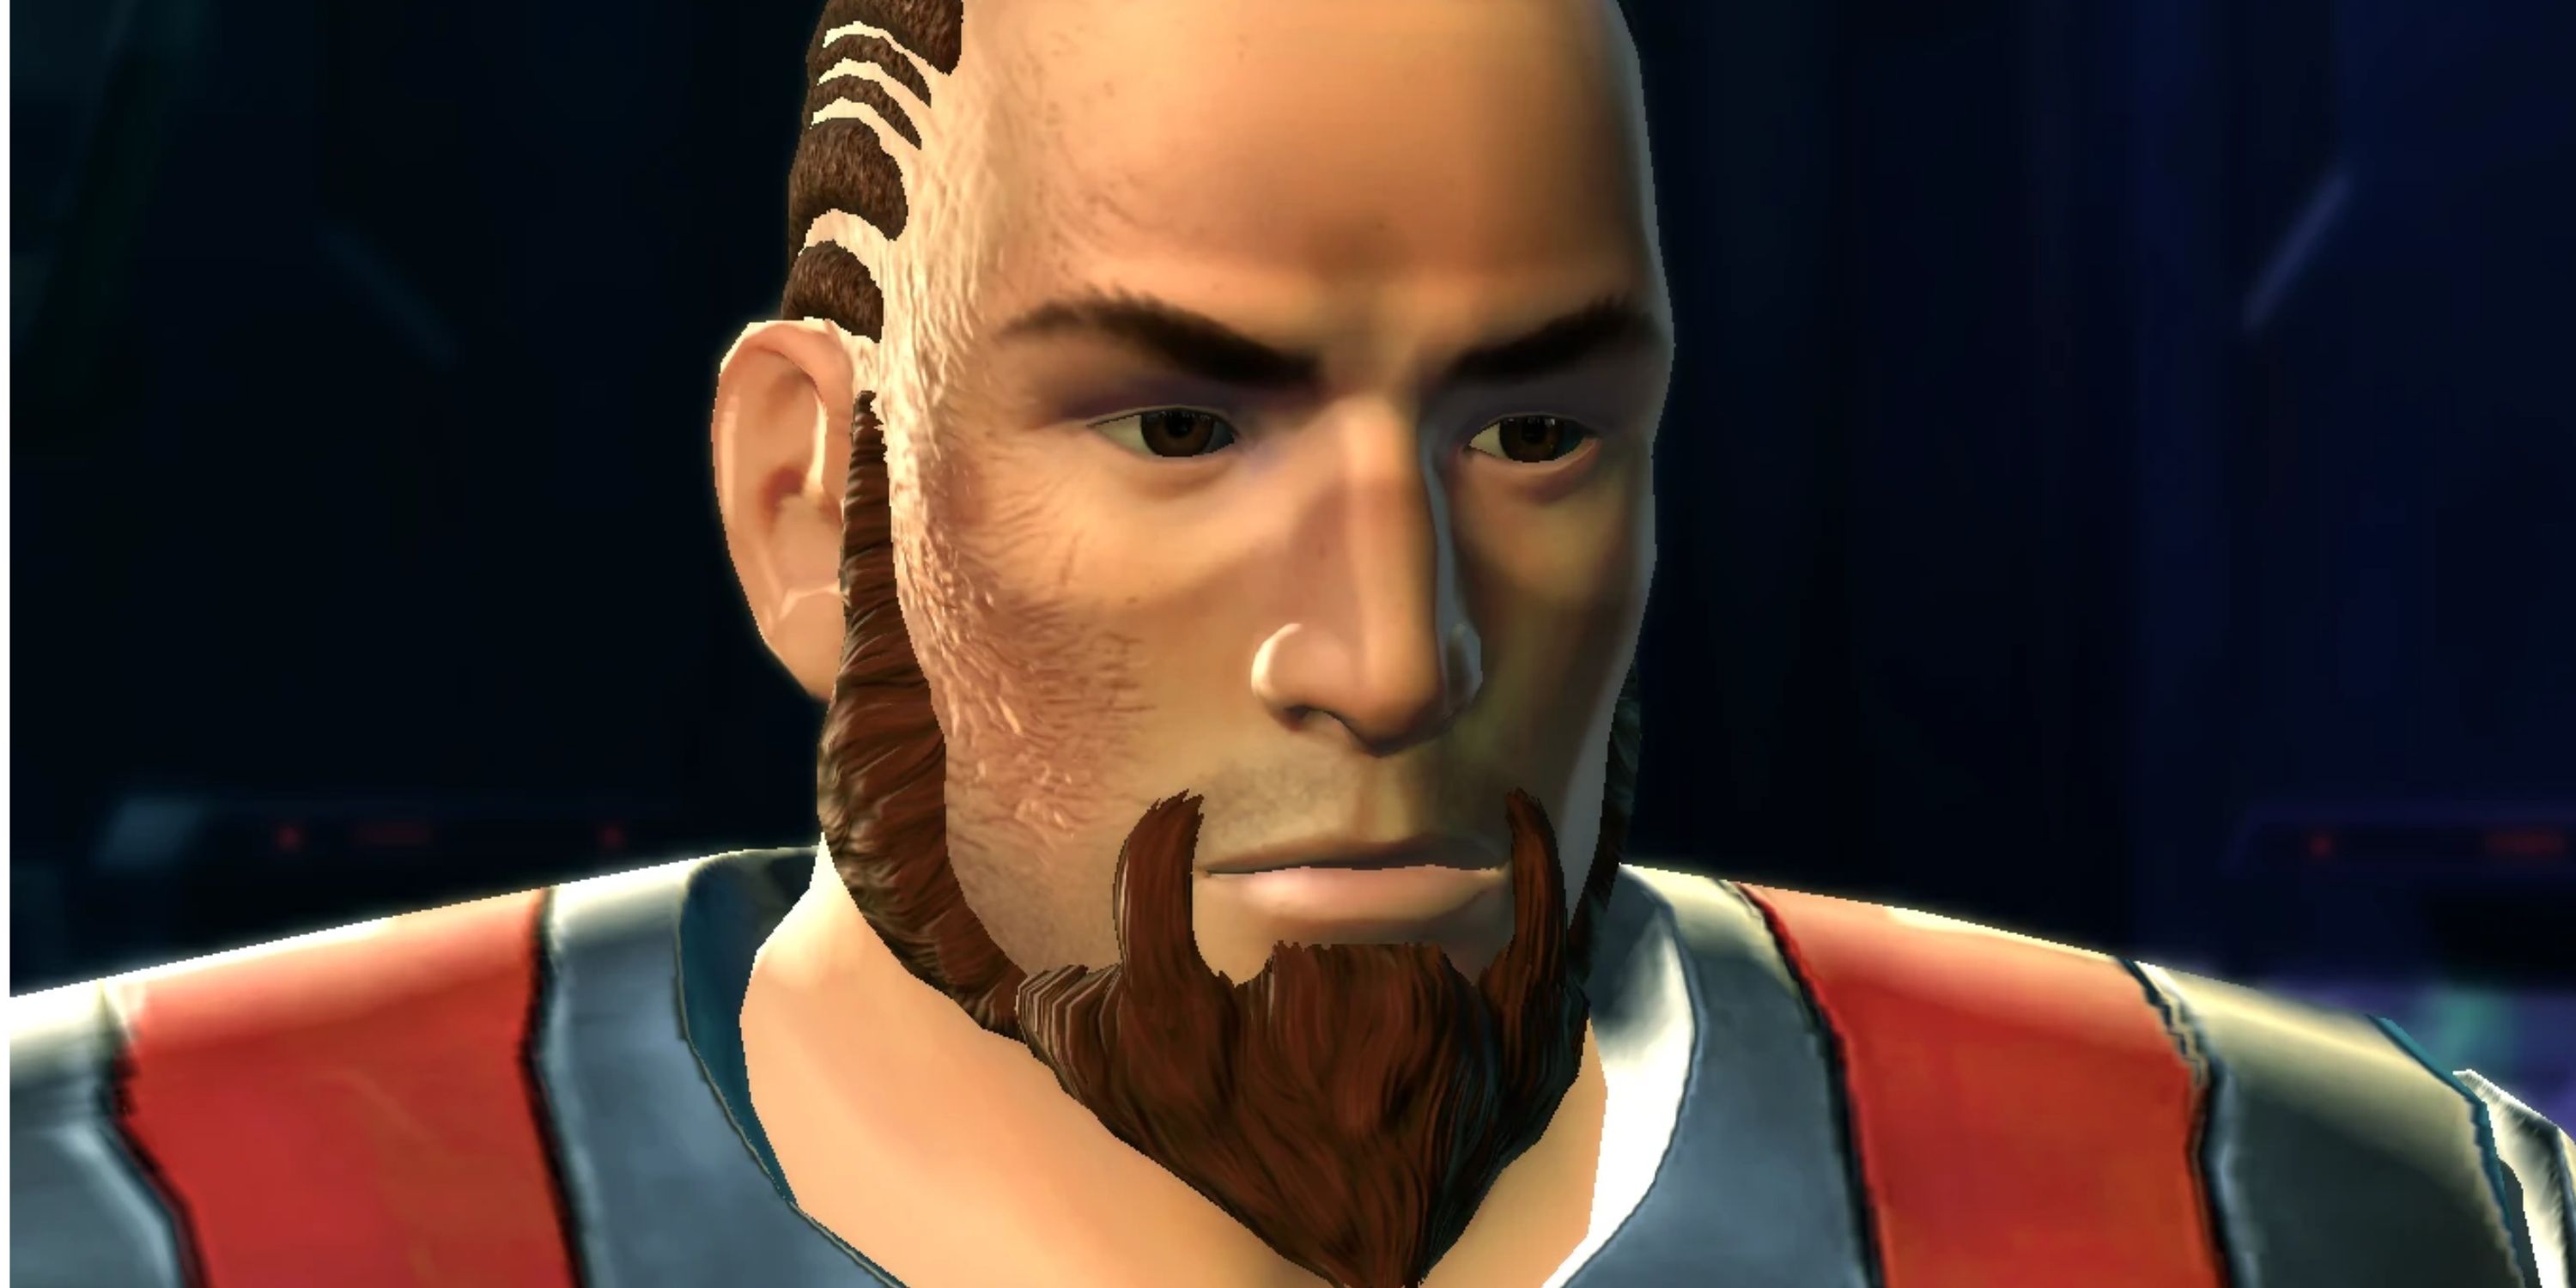 Lieutenant Pierce, a companion from Star Wars: The Old Republic